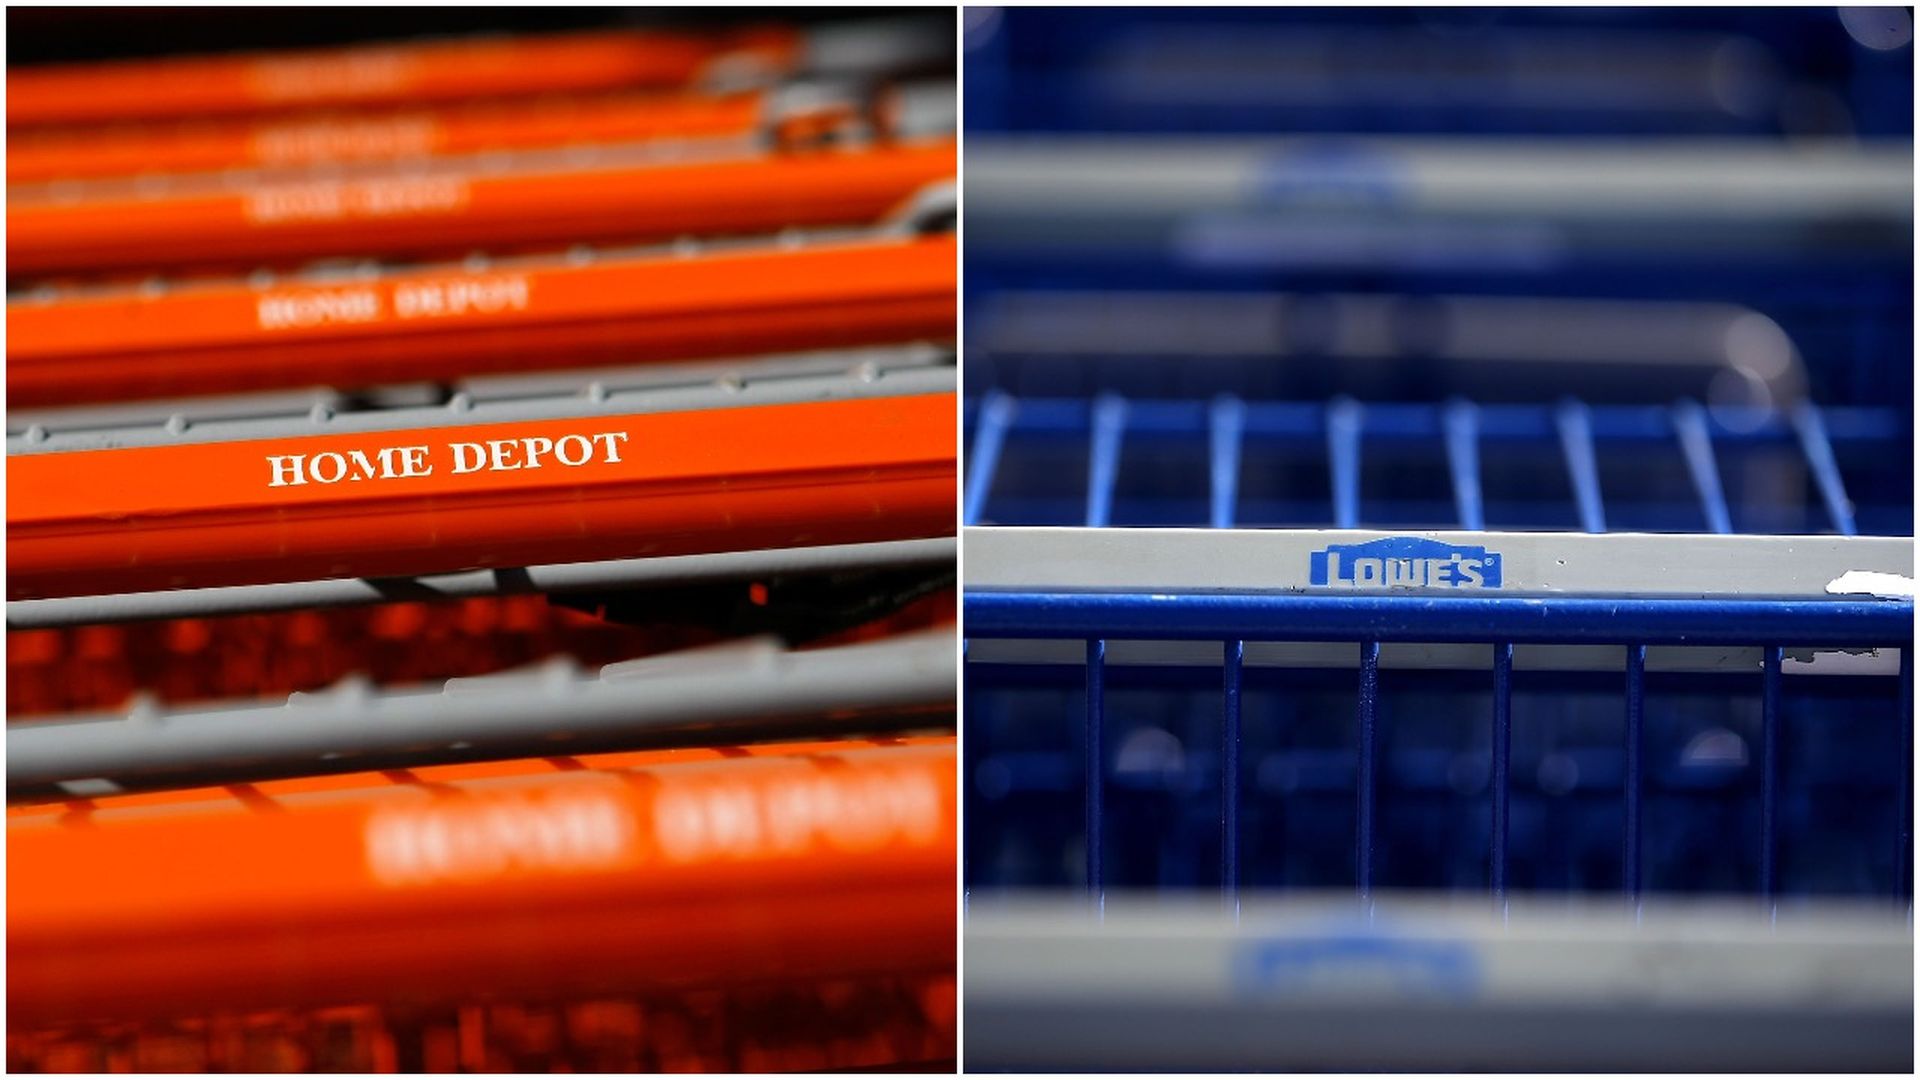 Home Depot & Lowe's carts